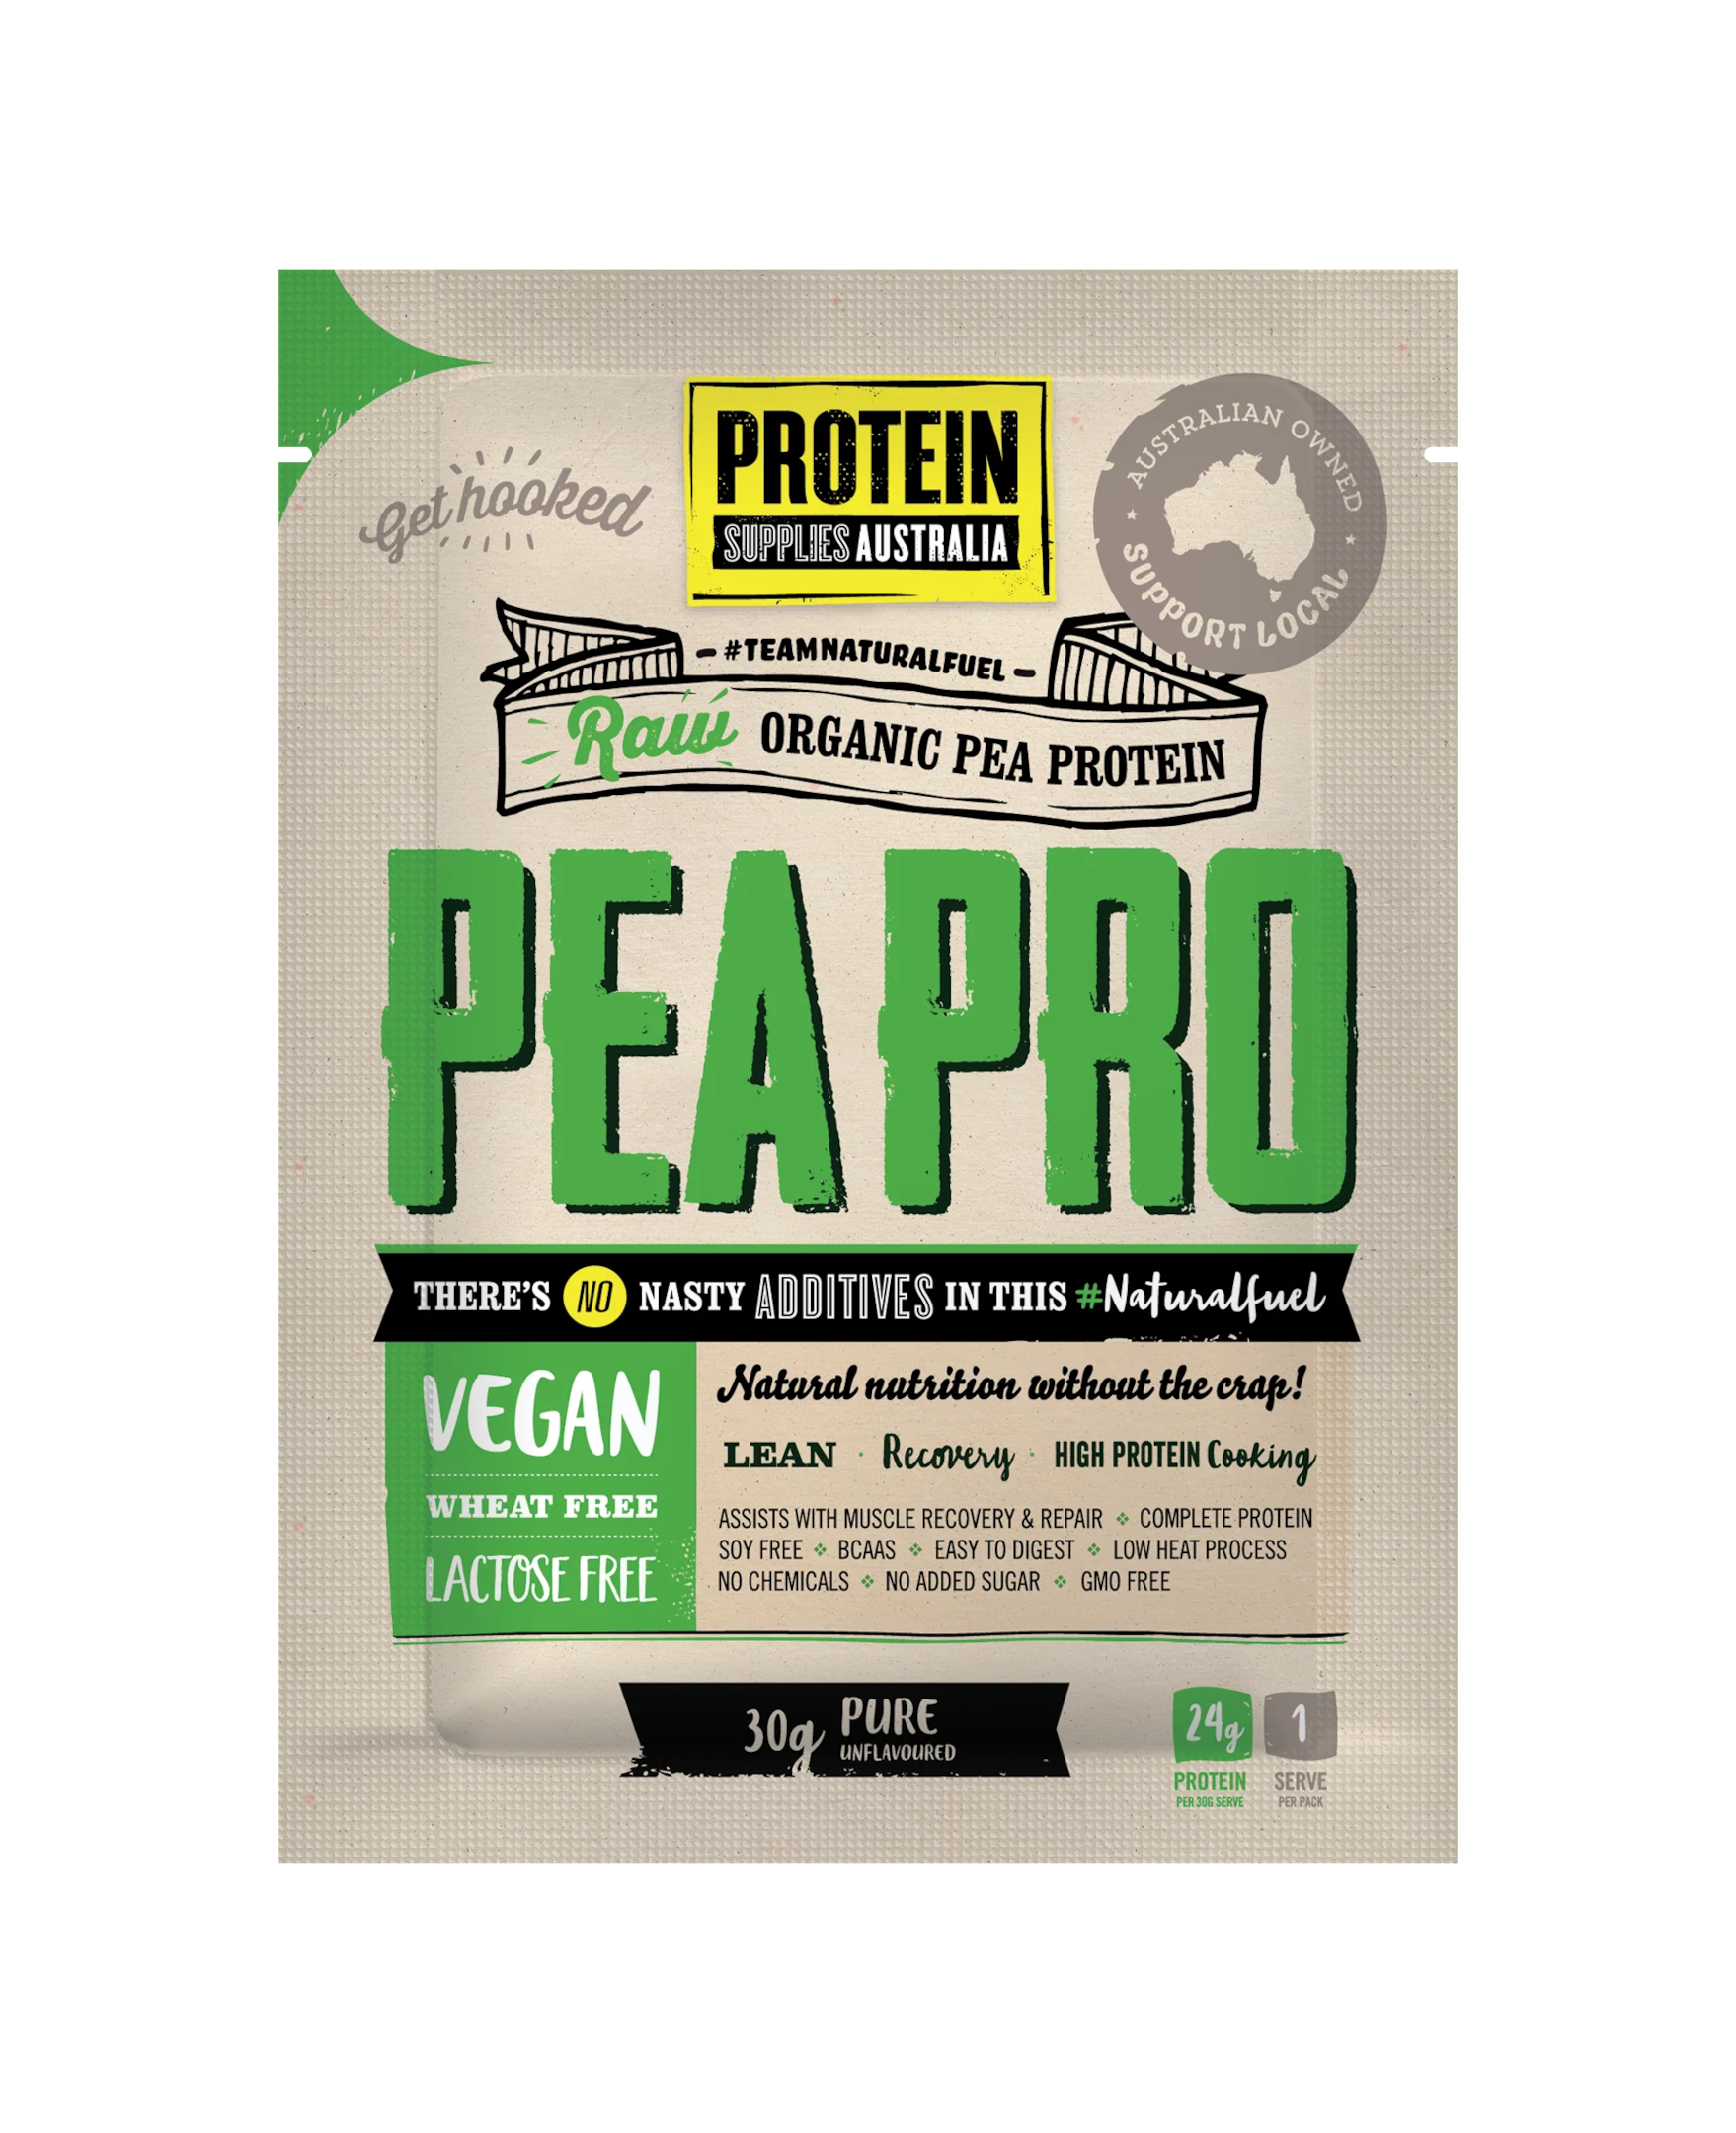 free samples, protein powder samples, protein powders